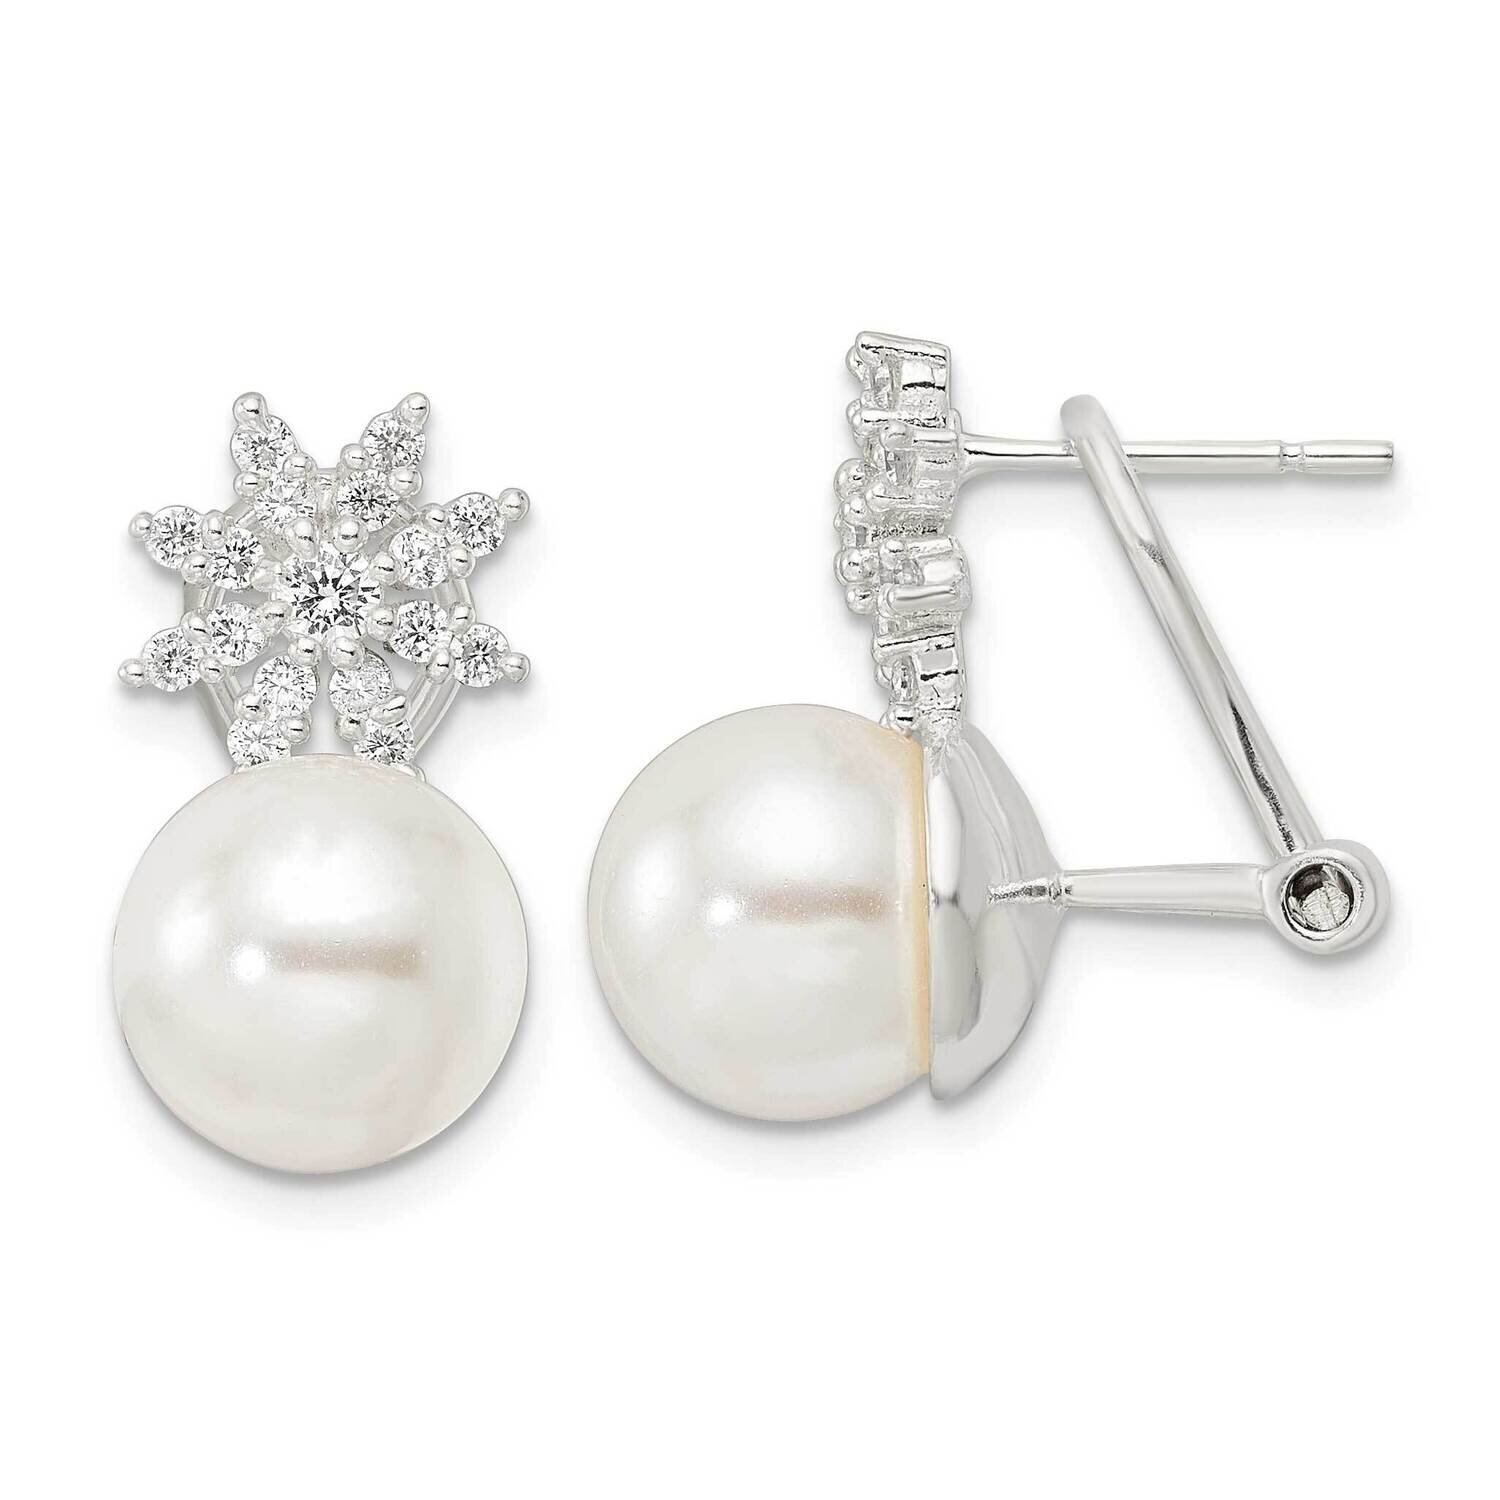 Imitation Shell Pearl and CZ Diamond Floral Omega Back Earrings Sterling Silver QE16363